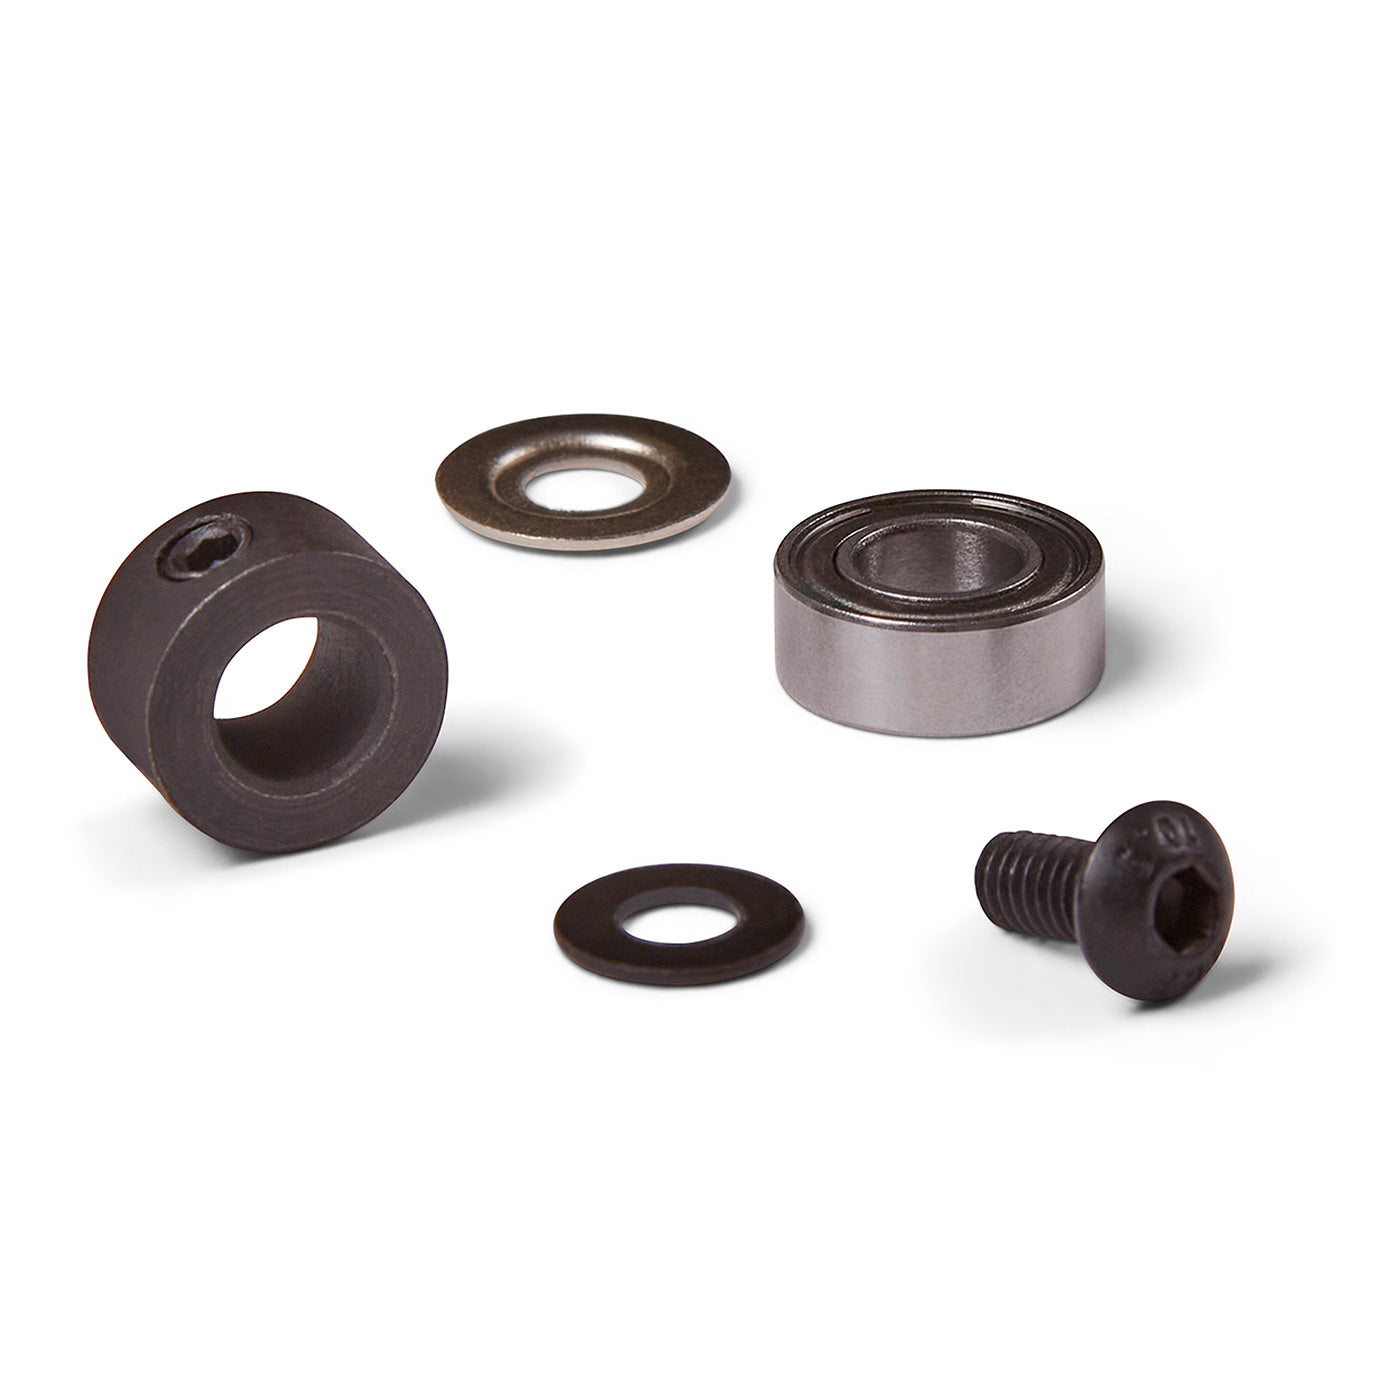 Bearing Kit for R5693, R5757 and R5828  